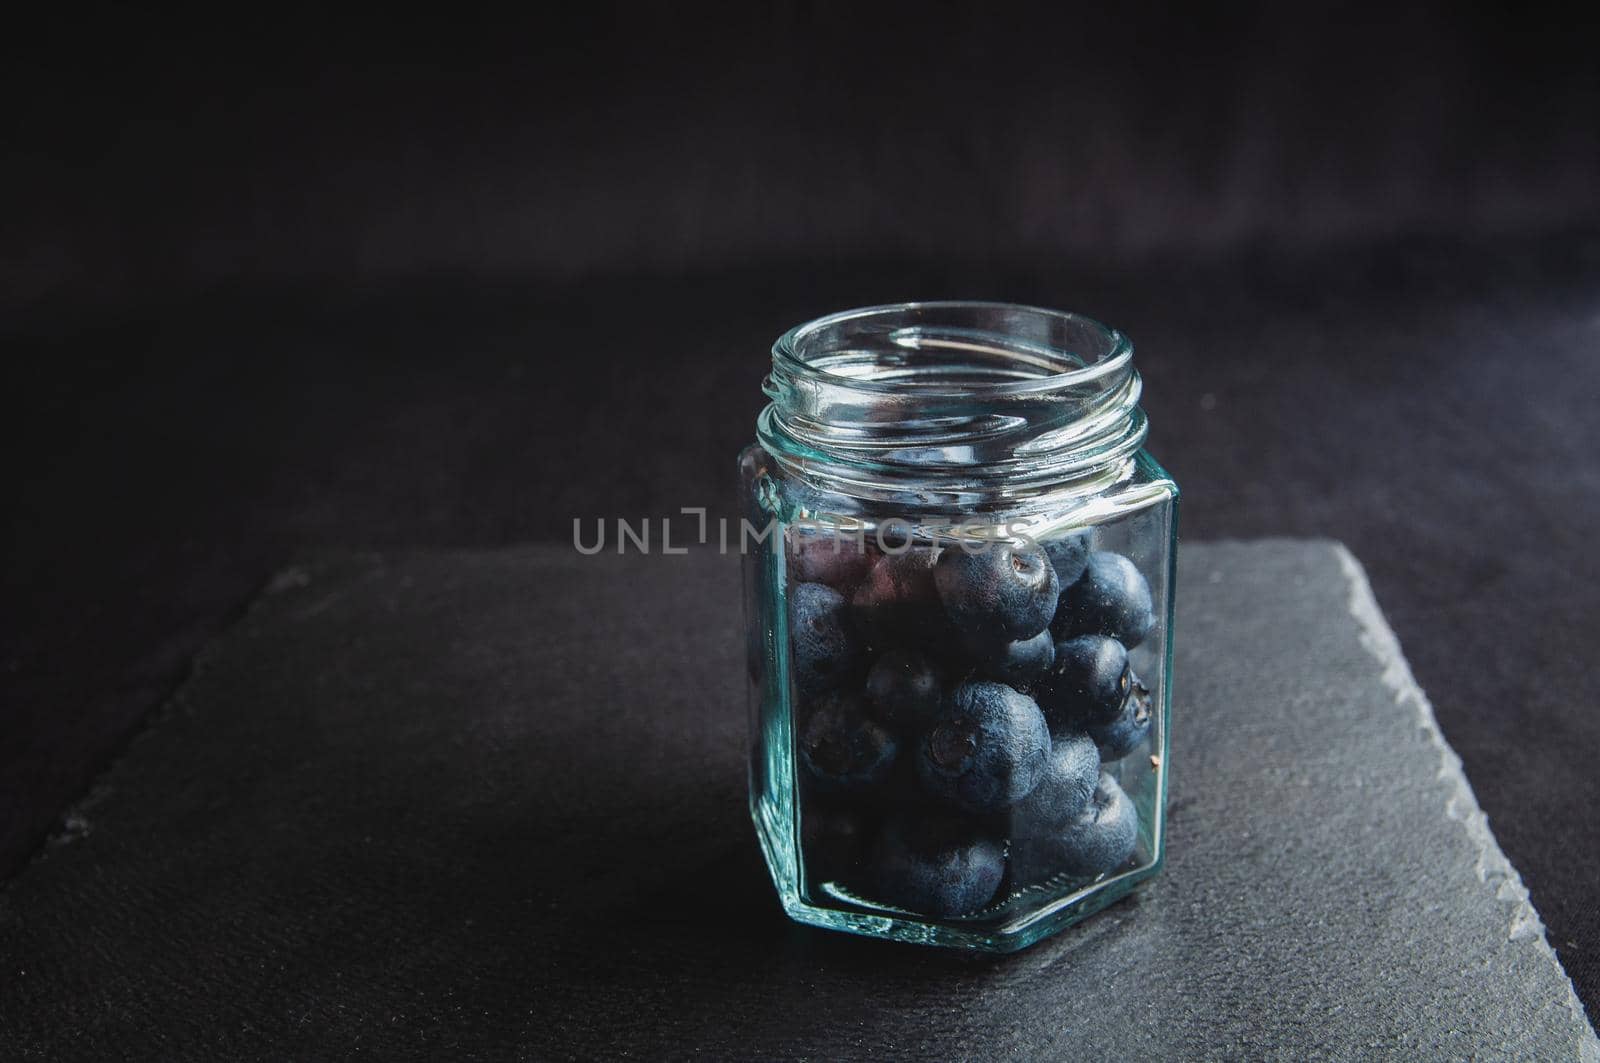 Fresh blueberries in a glass jar and laid out on a black board. Blueberries for a healthy diet and vegetarians